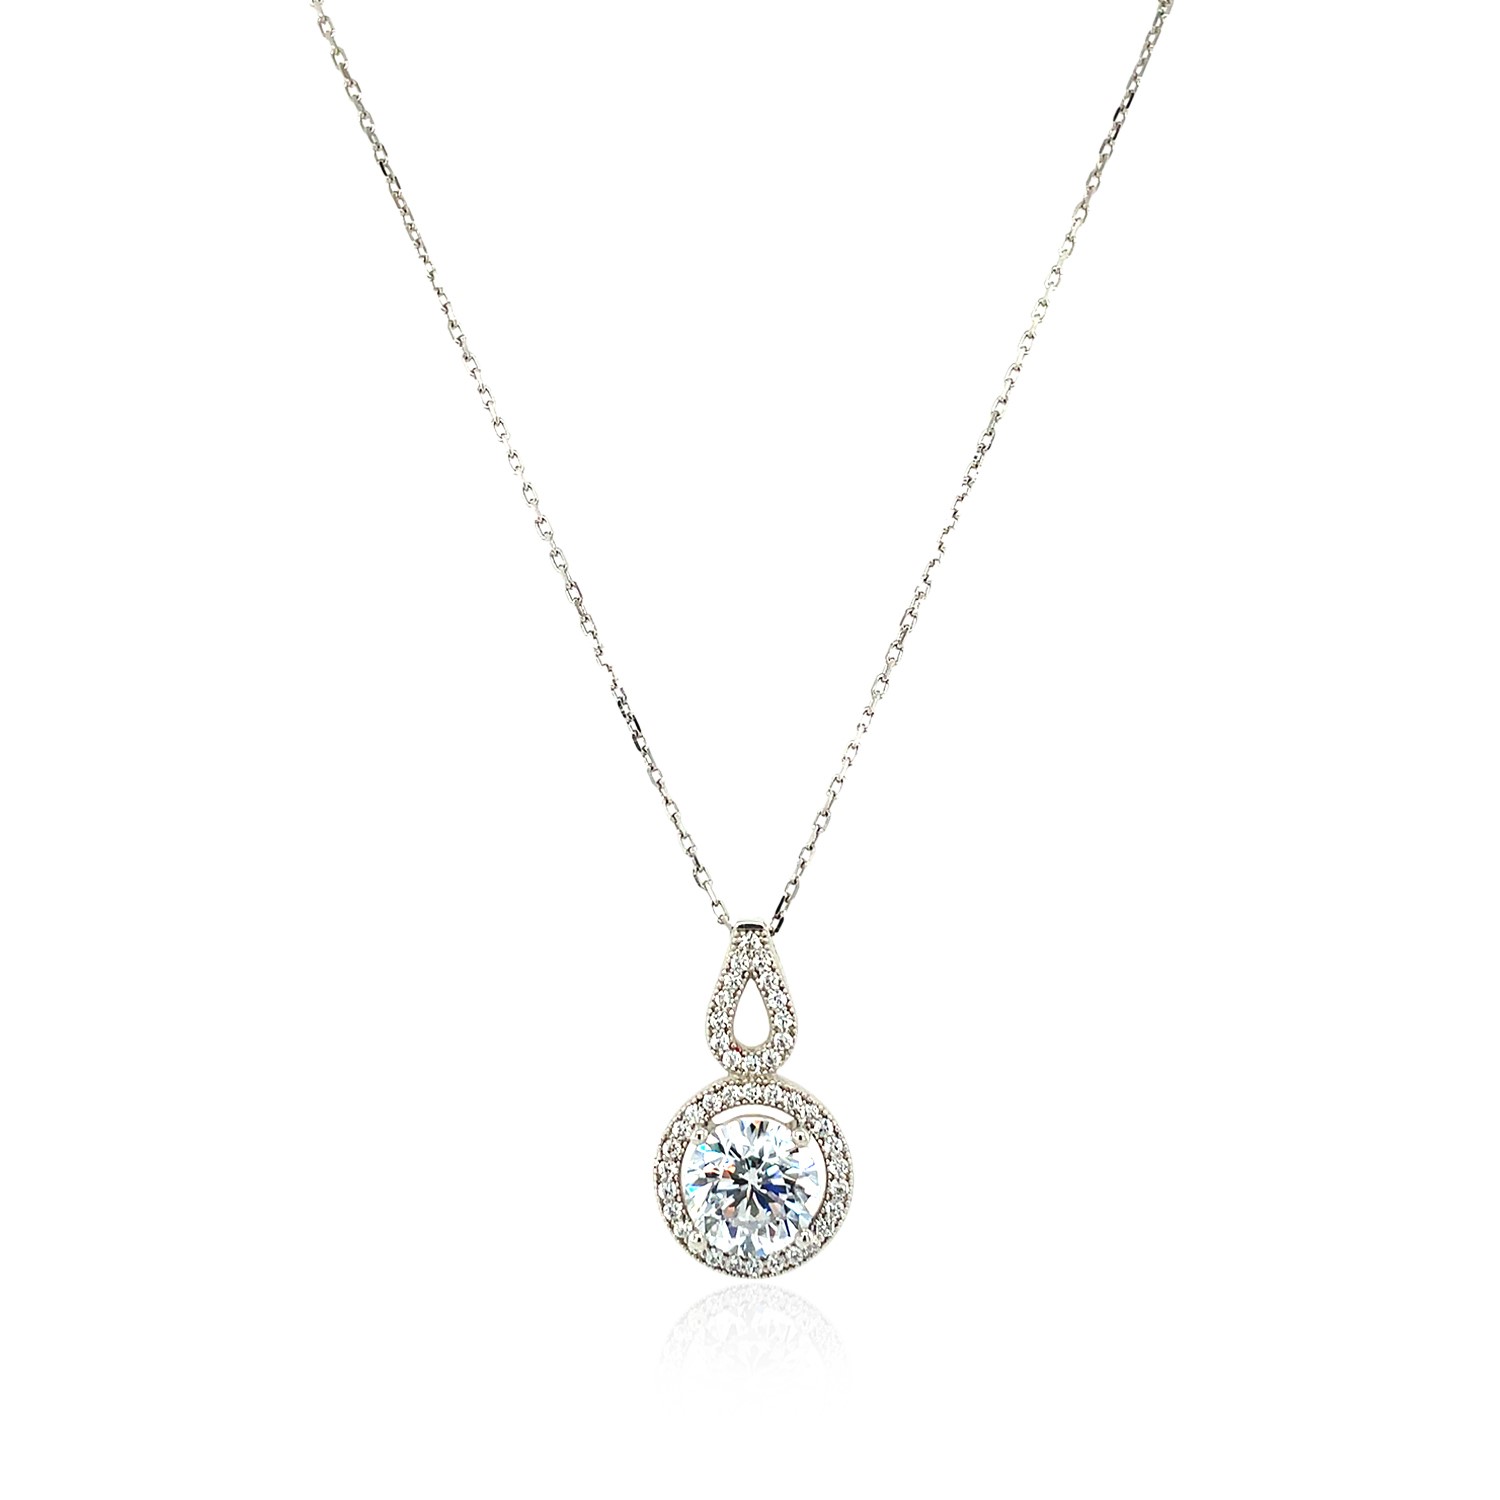 Circle and Teardrop Pendant with Cubic Zirconia in Sterling Silver